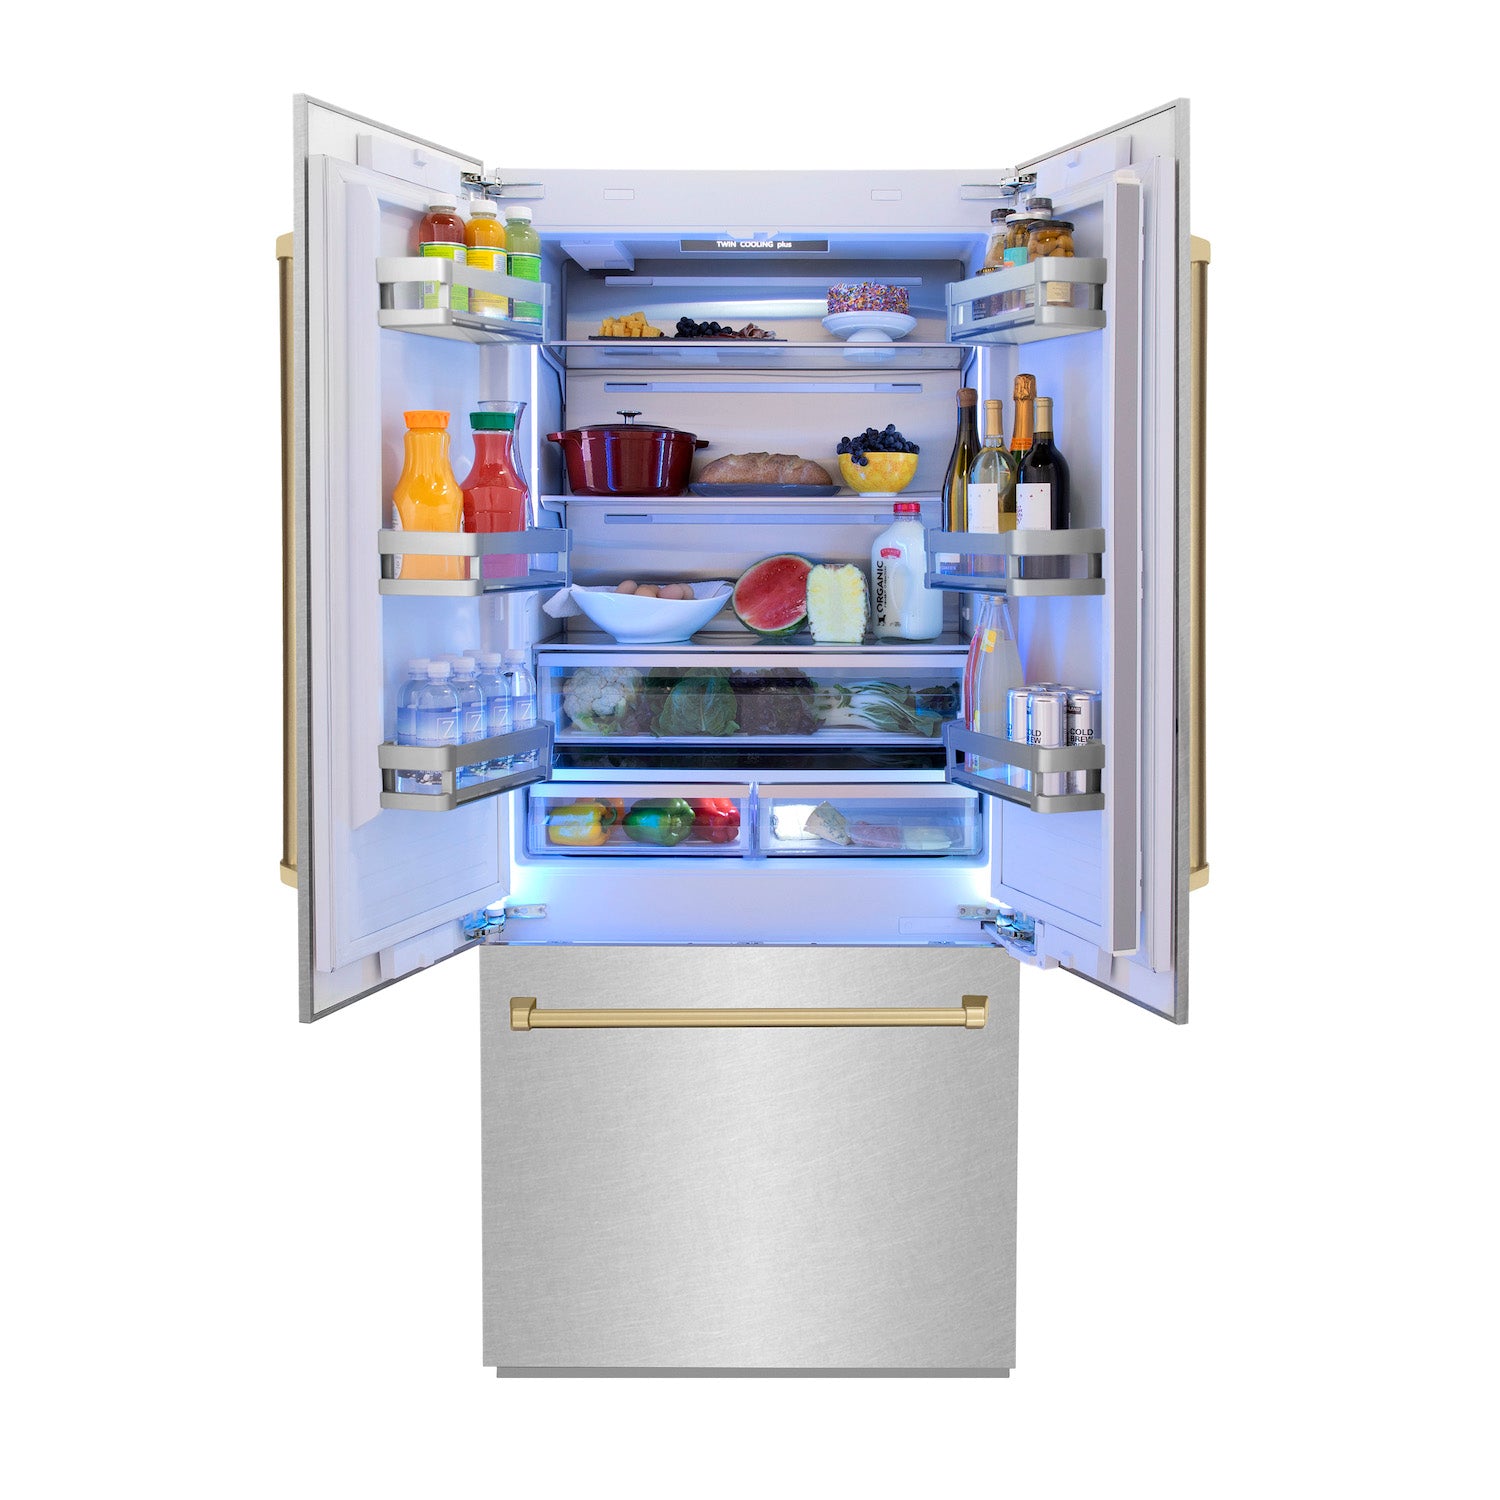 ZLINE Autograph Edition 36 in. 19.6 cu. ft. Built-in 2-Door Bottom Freezer Refrigerator with Internal Water and Ice Dispenser in Fingerprint Resistant Stainless Steel with Champagne Bronze Accents (RBIVZ-SN-36-CB) front, open with food inside refrigeration compartment.